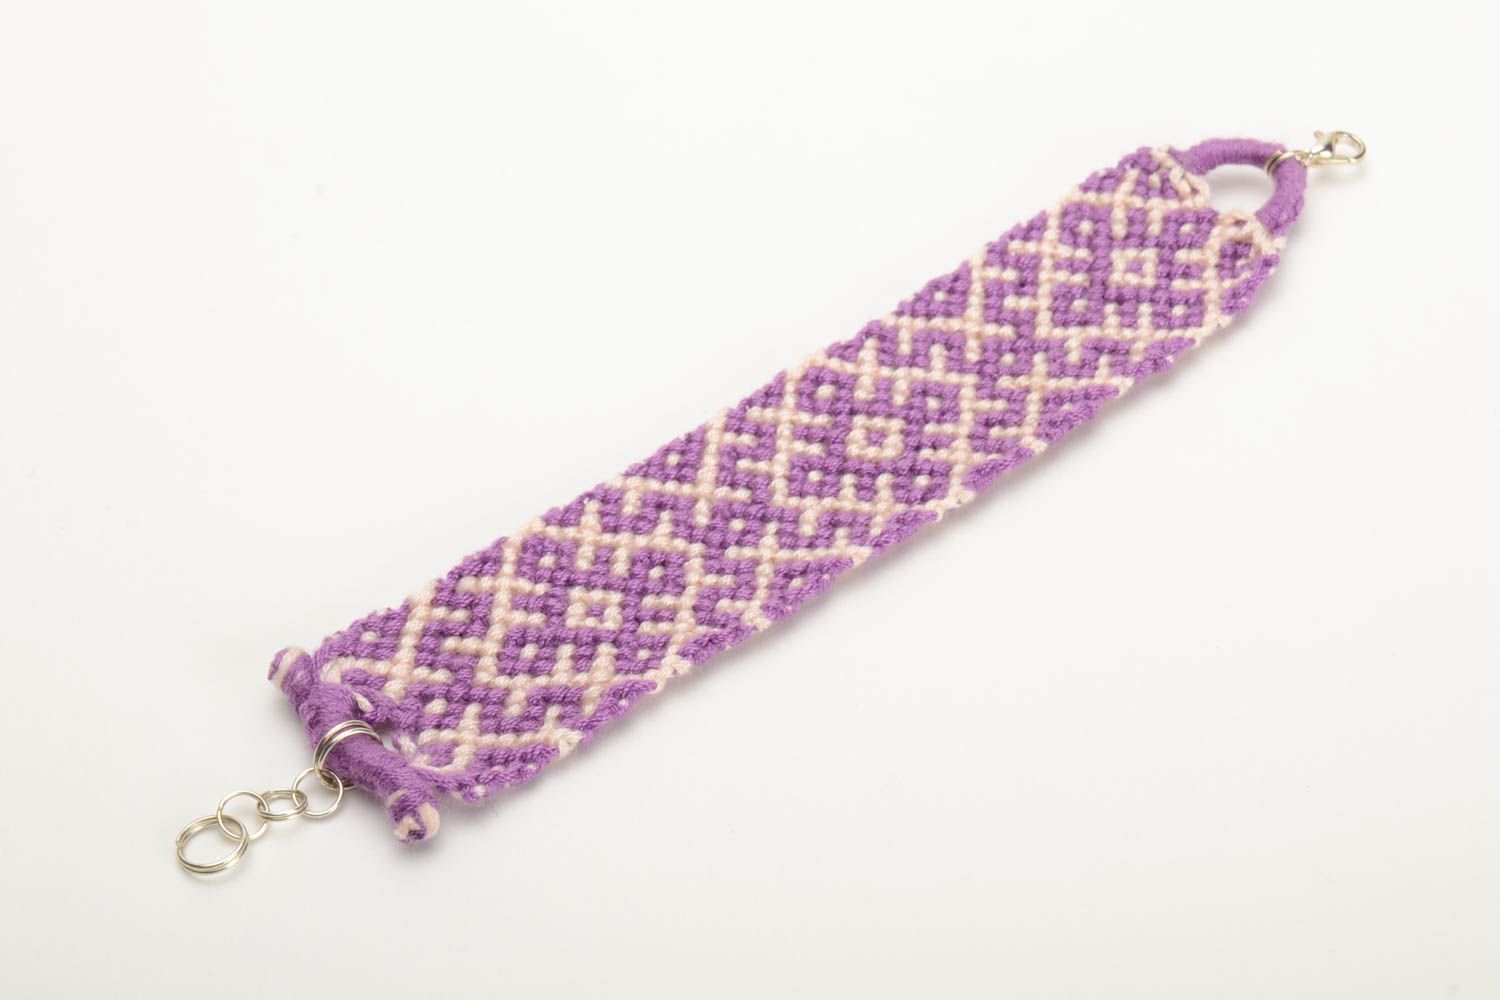 Lilac handmade bright wide wrist bracelet woven of embroidery floss photo 4